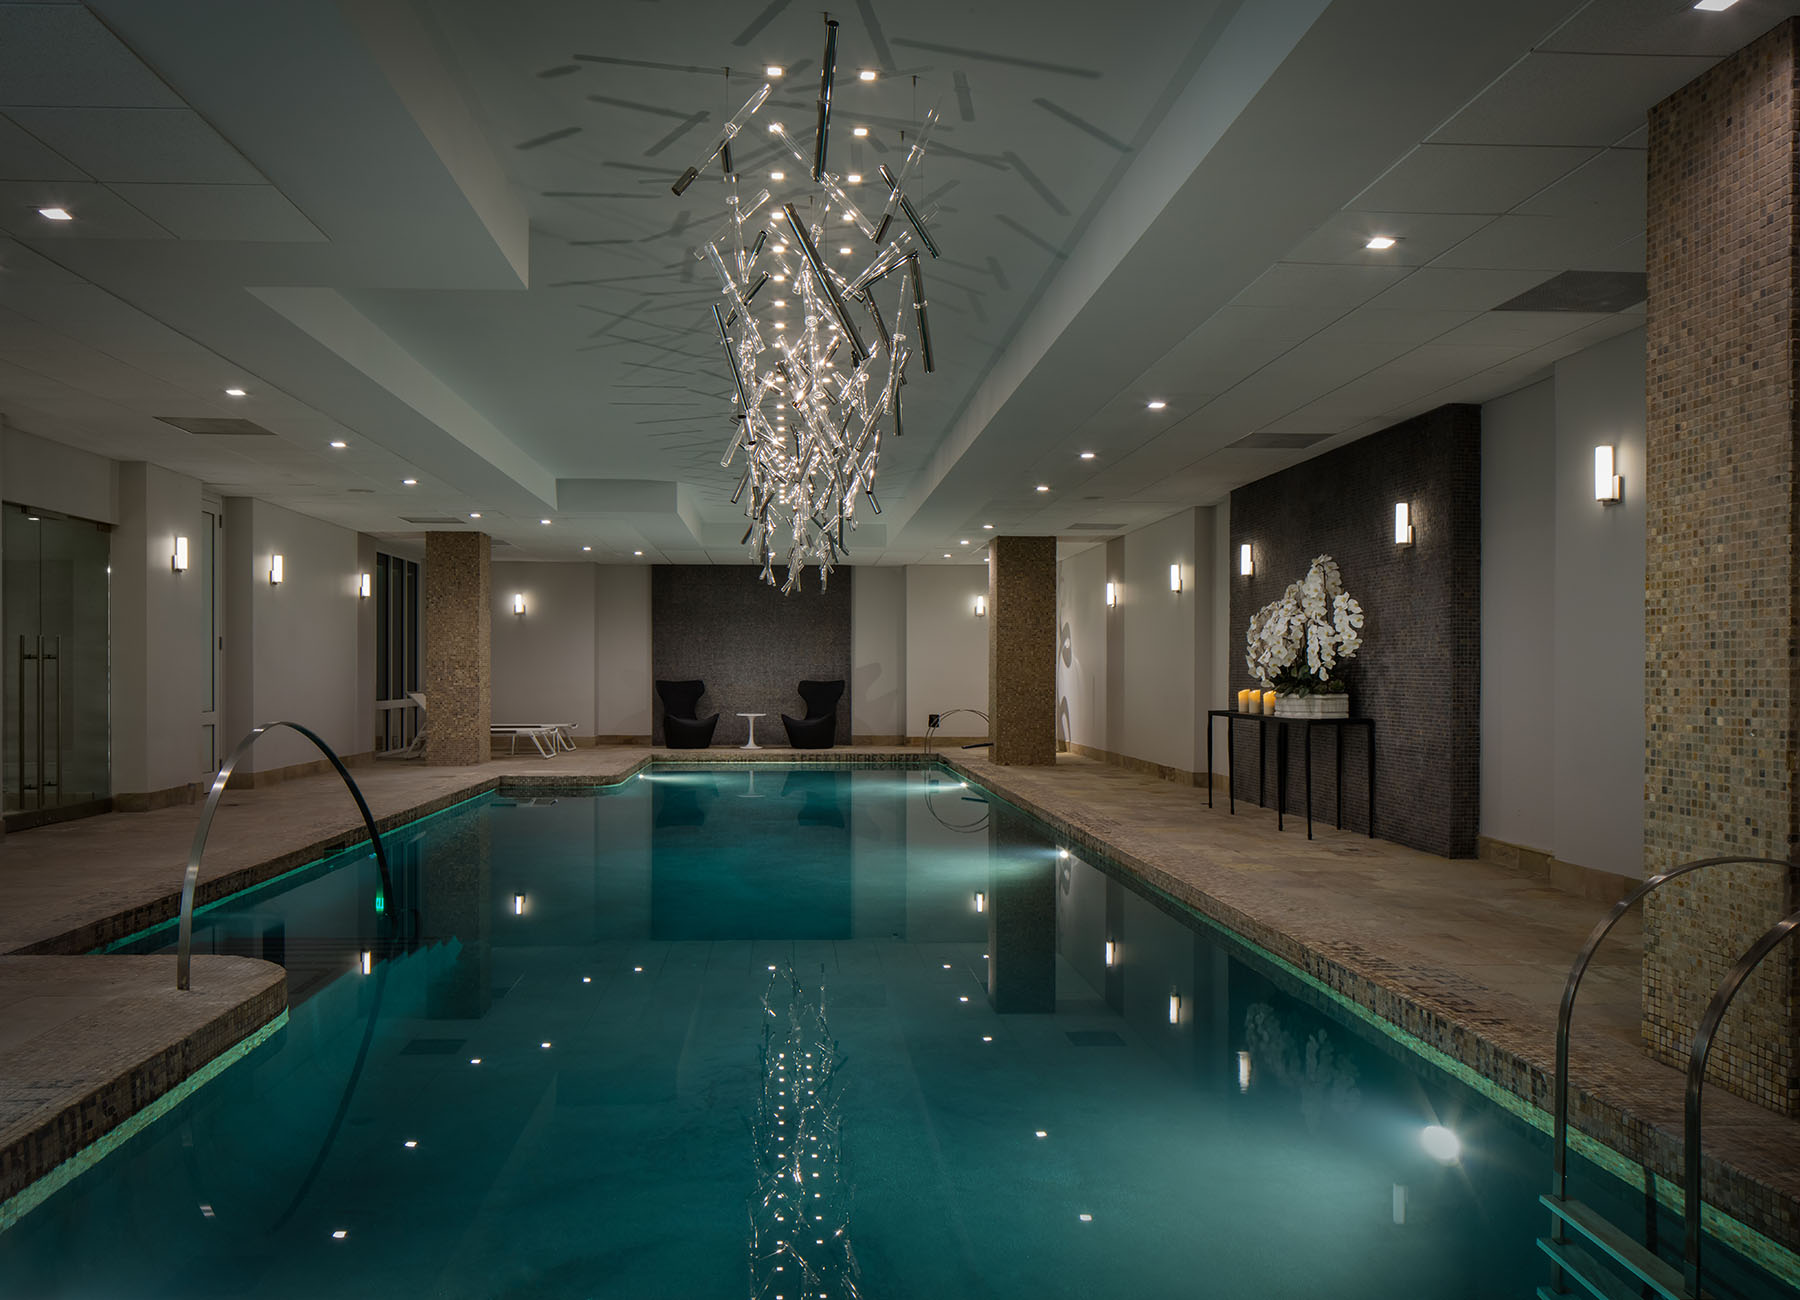 AKA Sutton Place luxury indoor pool with chrome lighting and marble accents